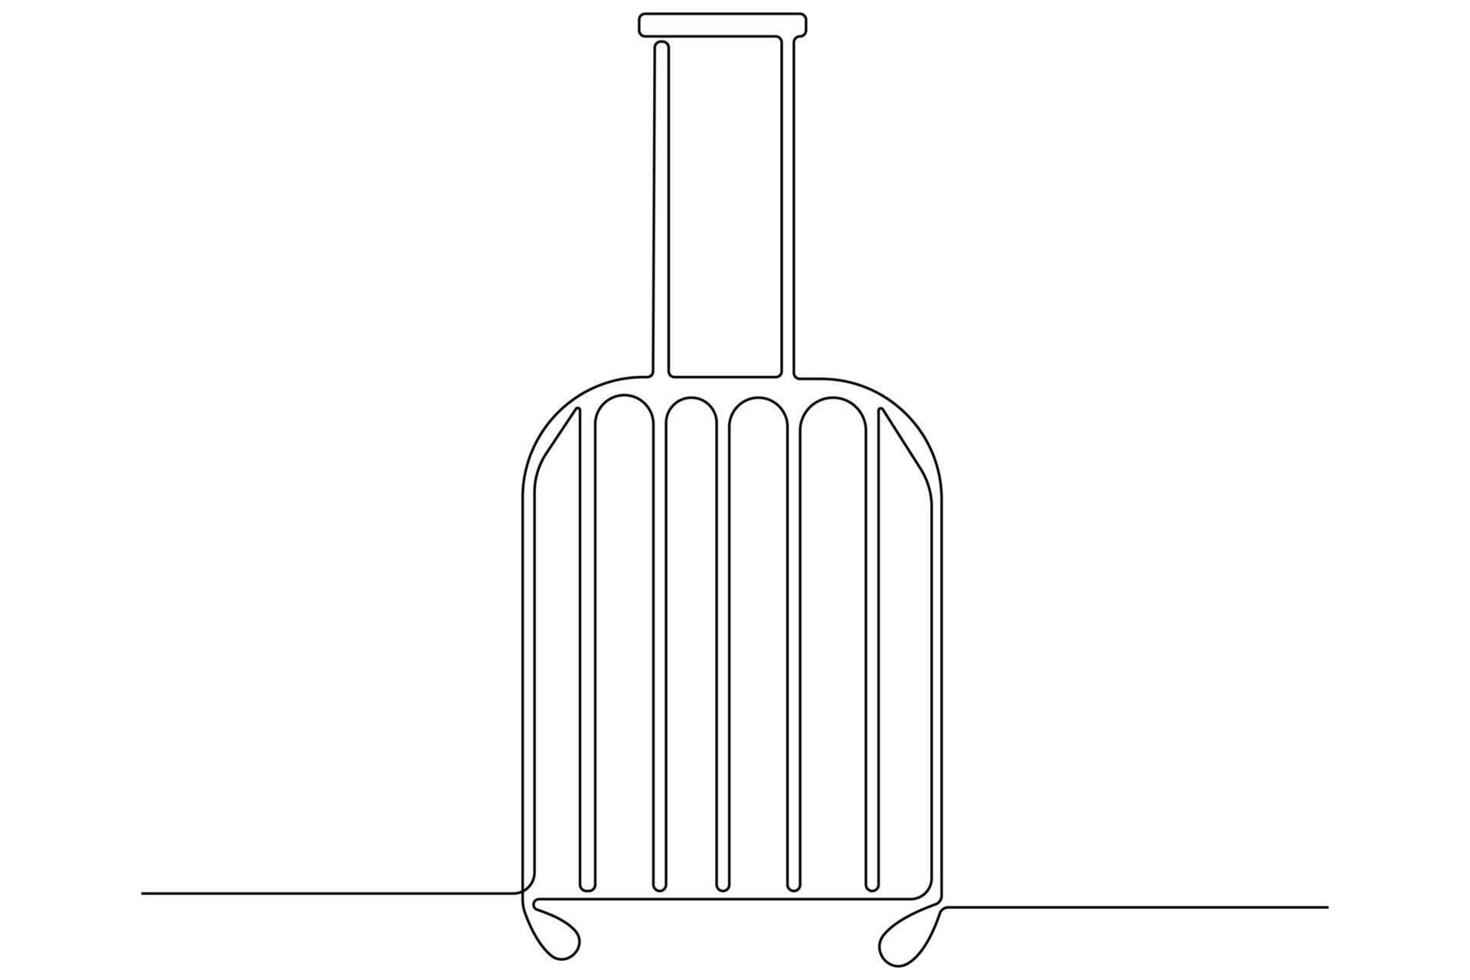 Continuous one line art drawing of suitcases, luggage design outline vector illustration